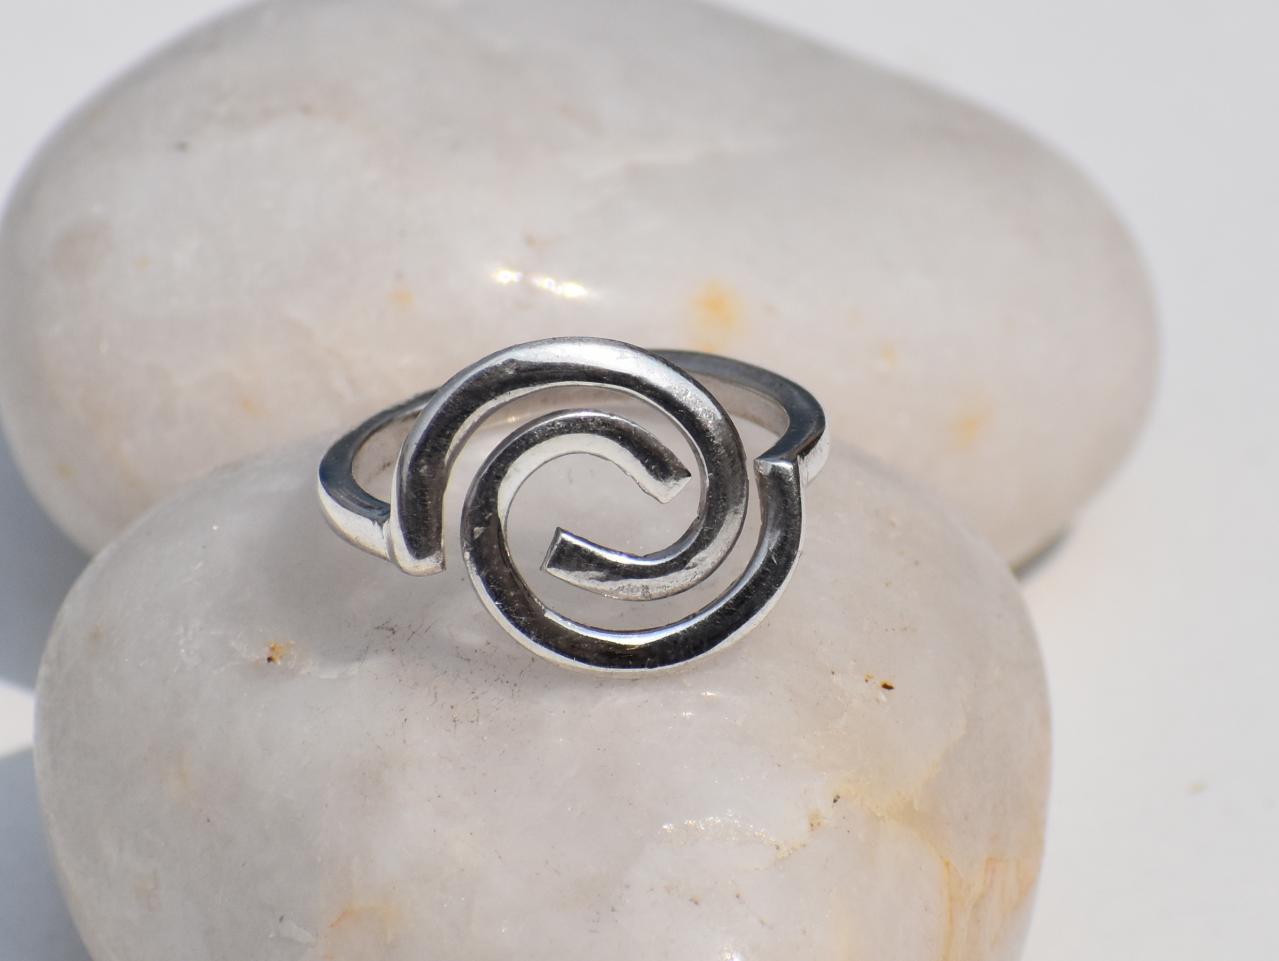 Spiral Ring, Swing Ring, Coil Ring, Midi Ring, Handmade Ring, 925 Silver Ring, Unisex Jewelry, Statement Ring, Adjustable Ring, Chunky Ring